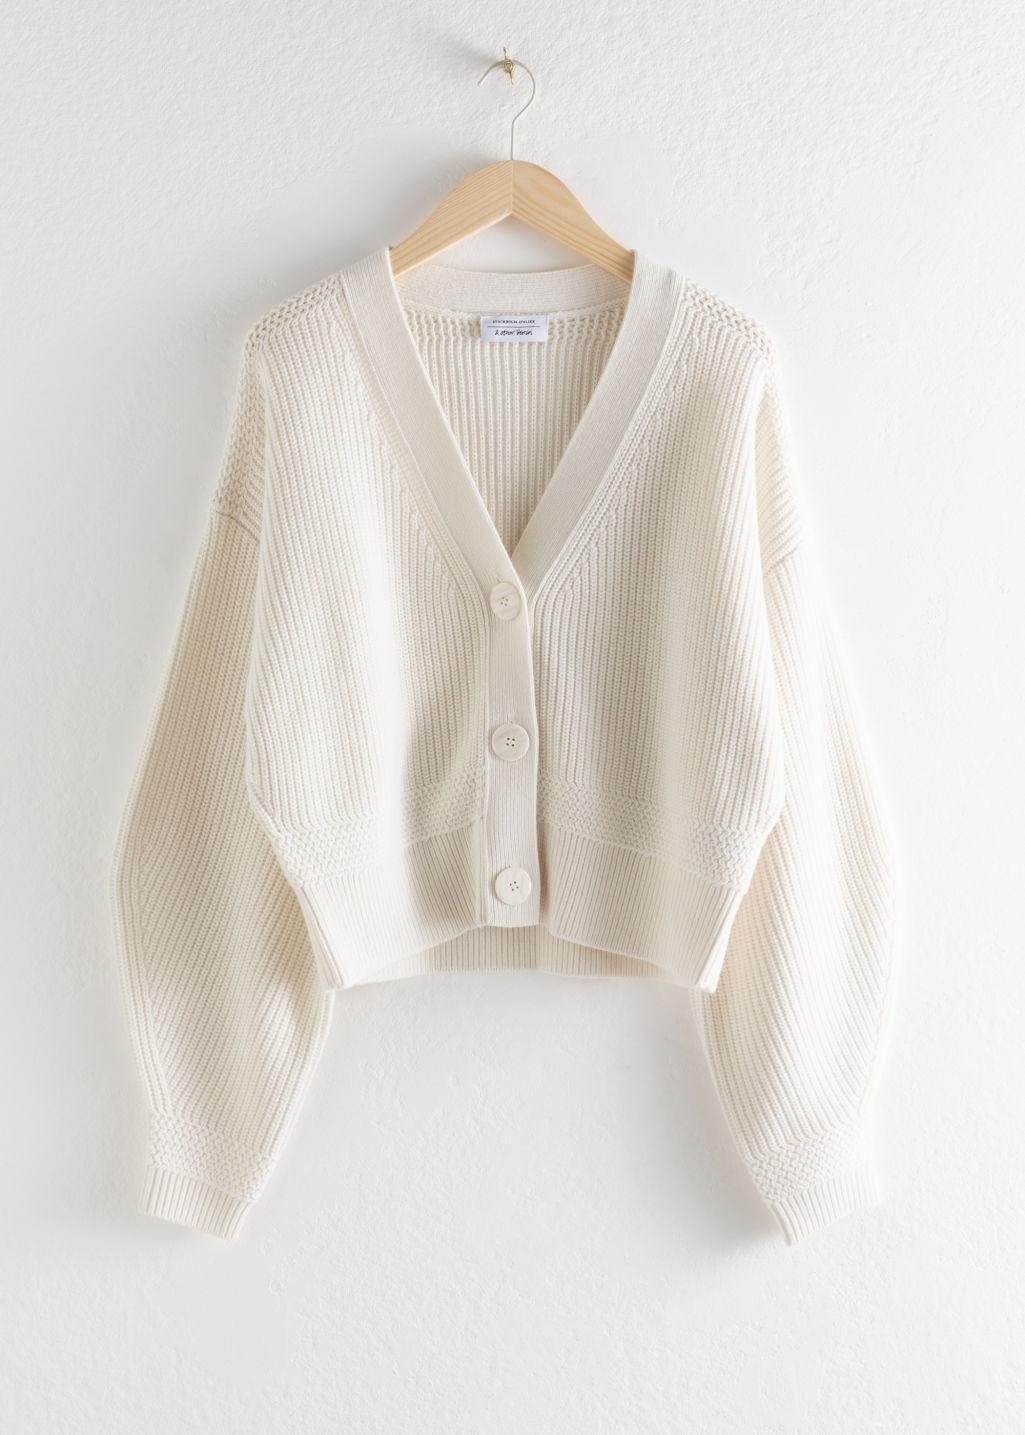 & Other Stories Cropped Cardigan in White | Lyst